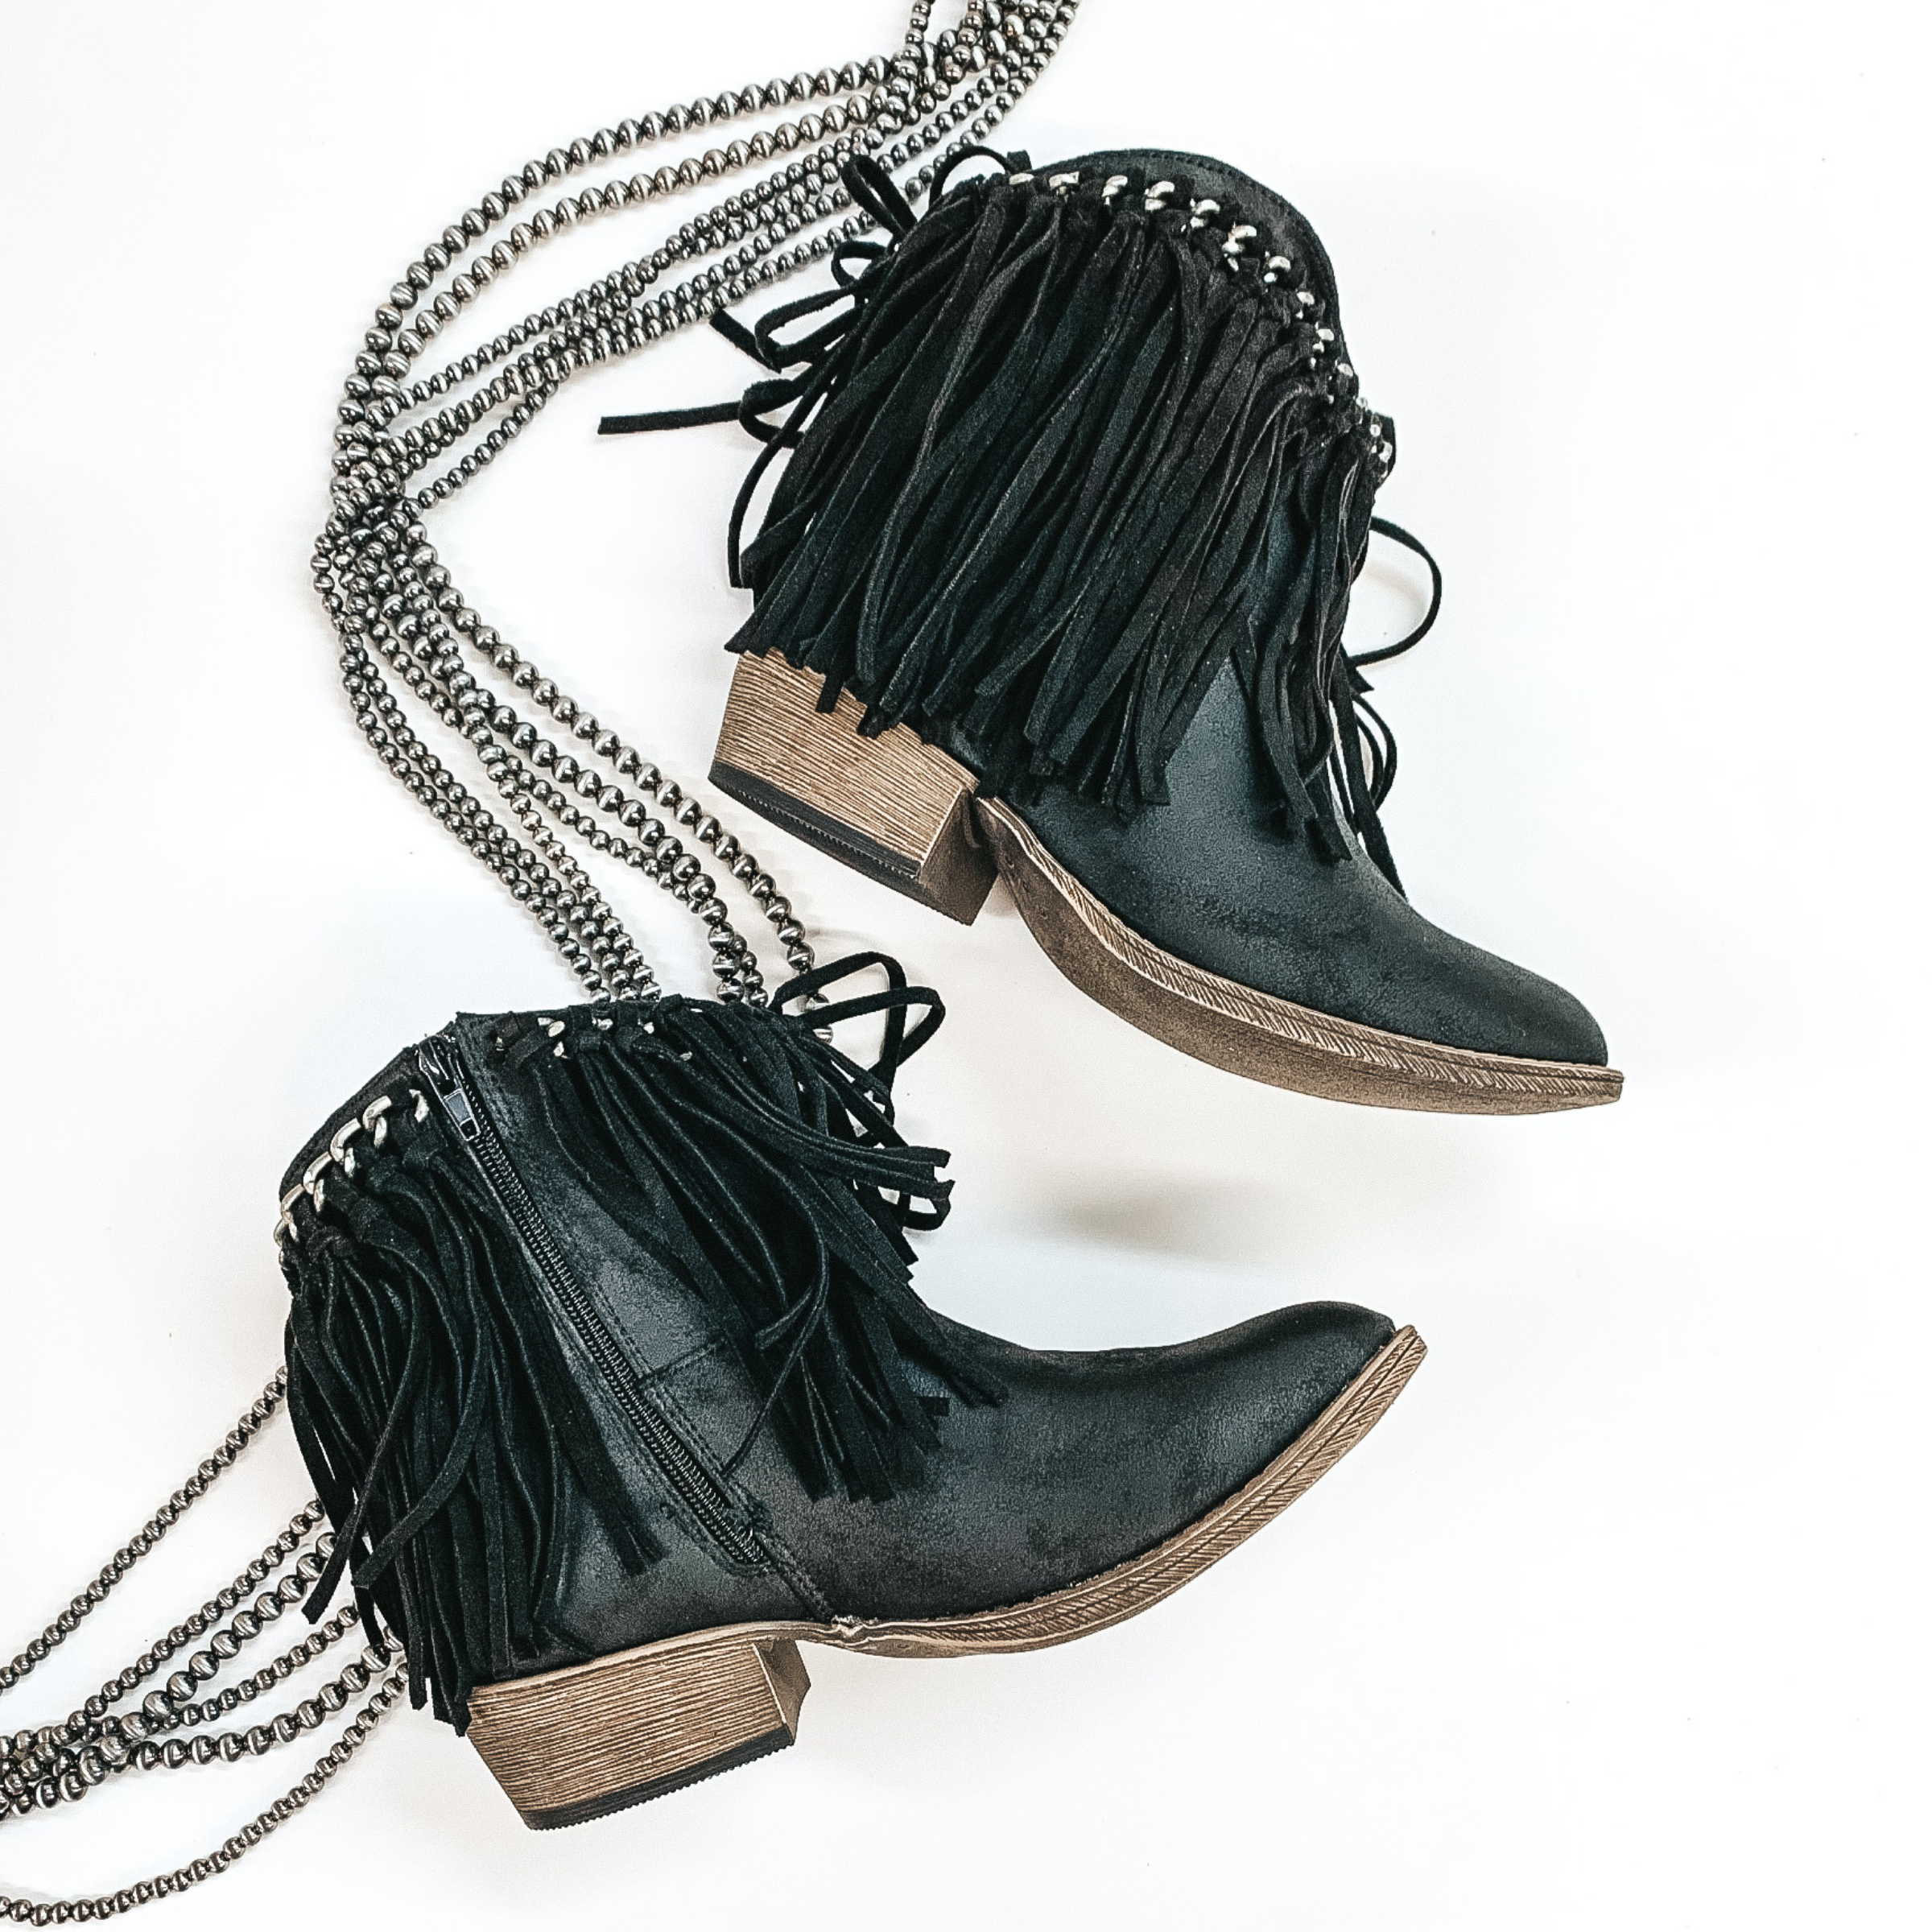 Very G | Rebel Girl Heeled Ankle Booties with Fringe in Black